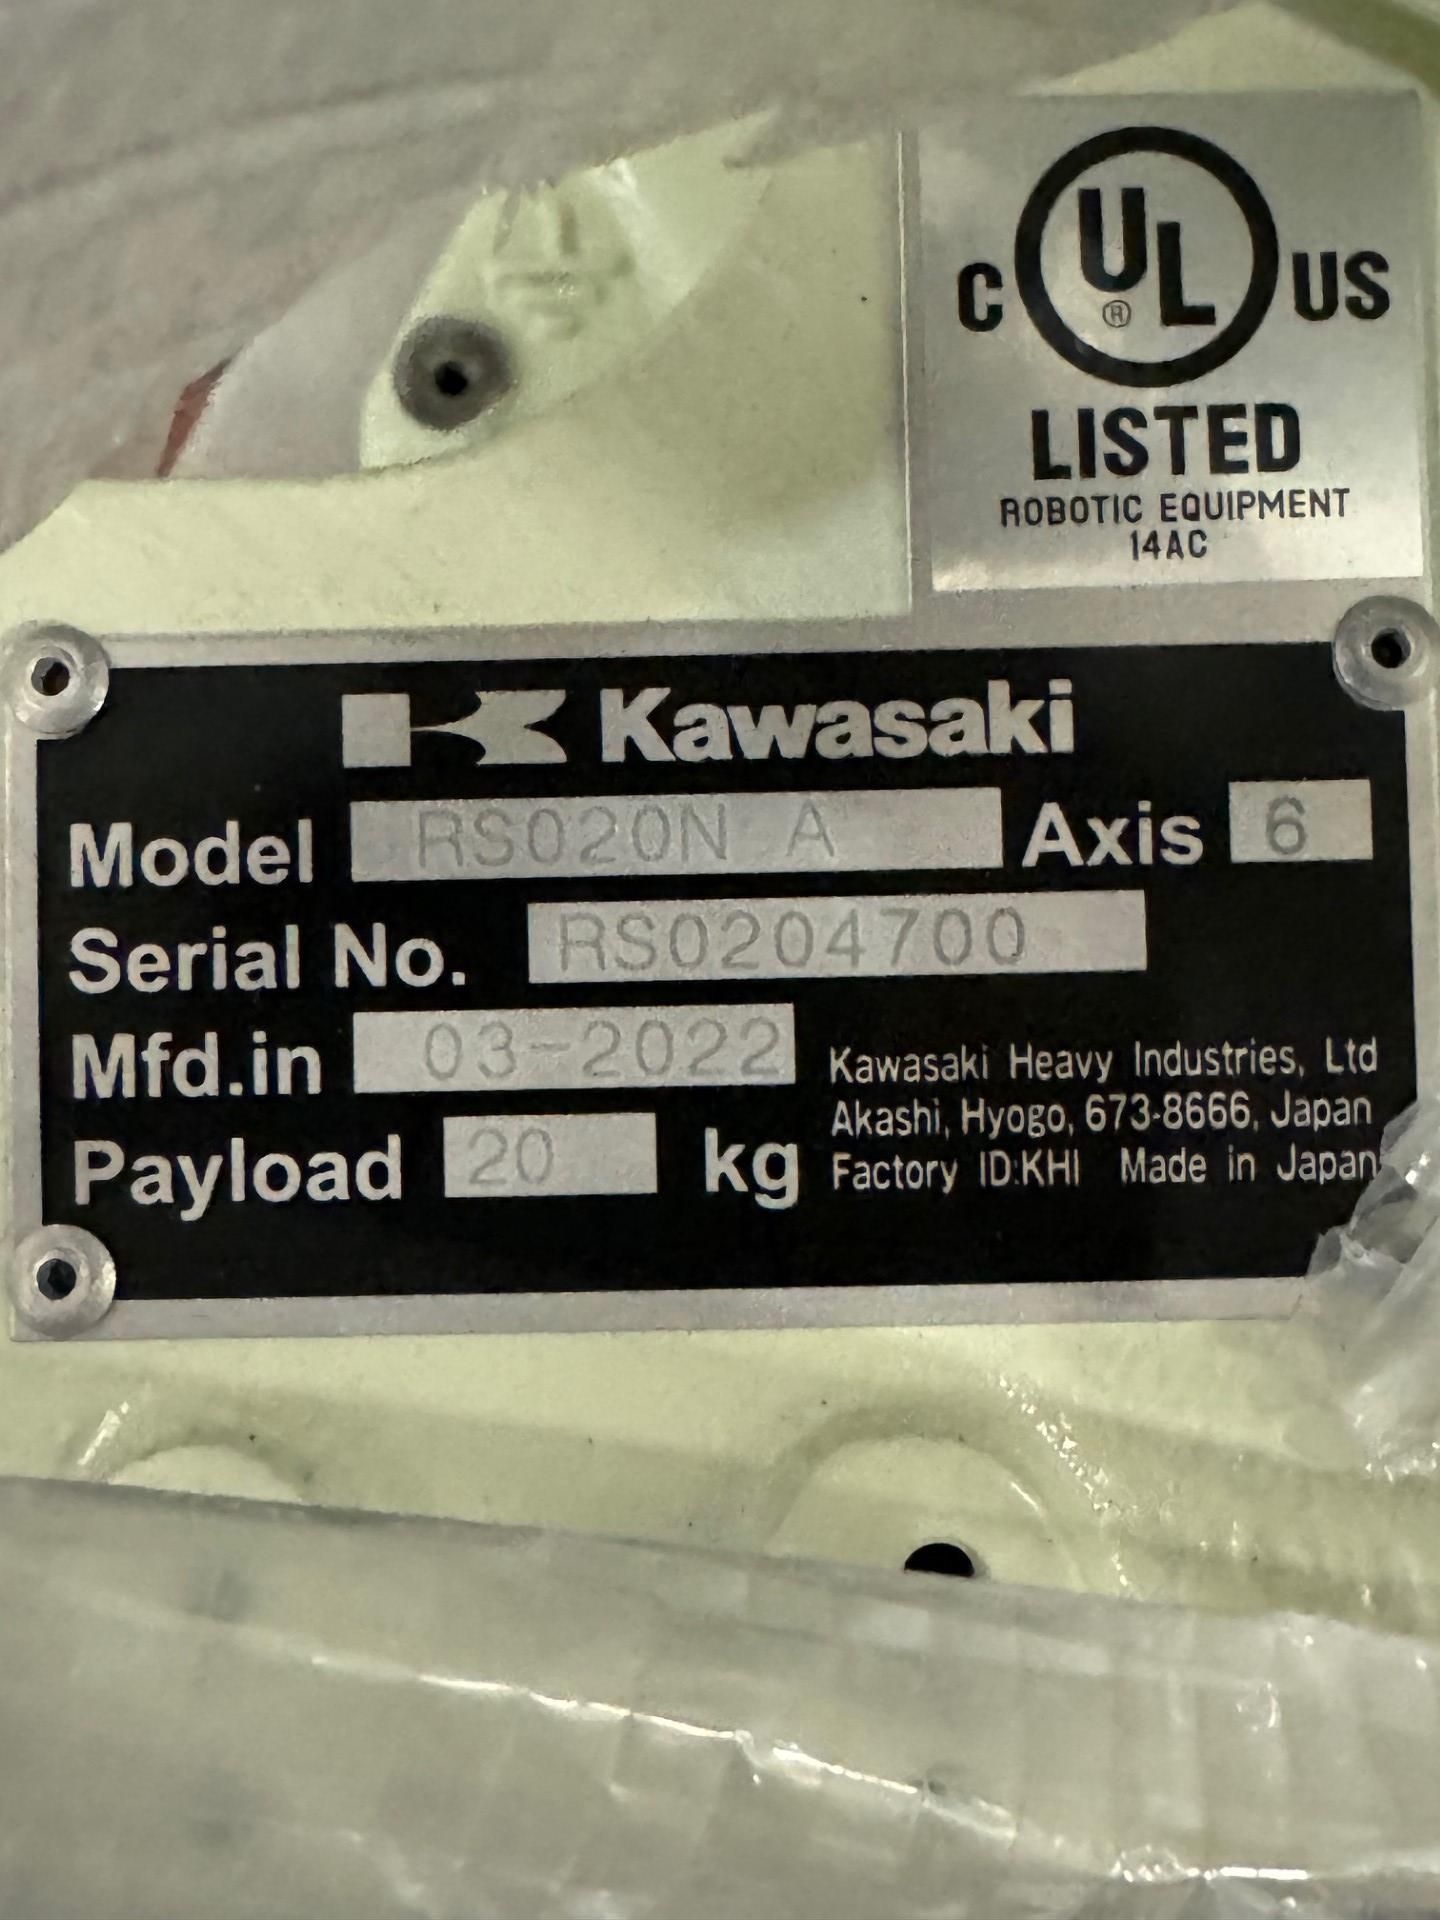 NEW KAWASAKI ROBOT MODEL RS020N, SN 4700, 20KG X 1725MM REACH WITH EO1 CONTROLS, CABLES & TEACH - Image 7 of 7